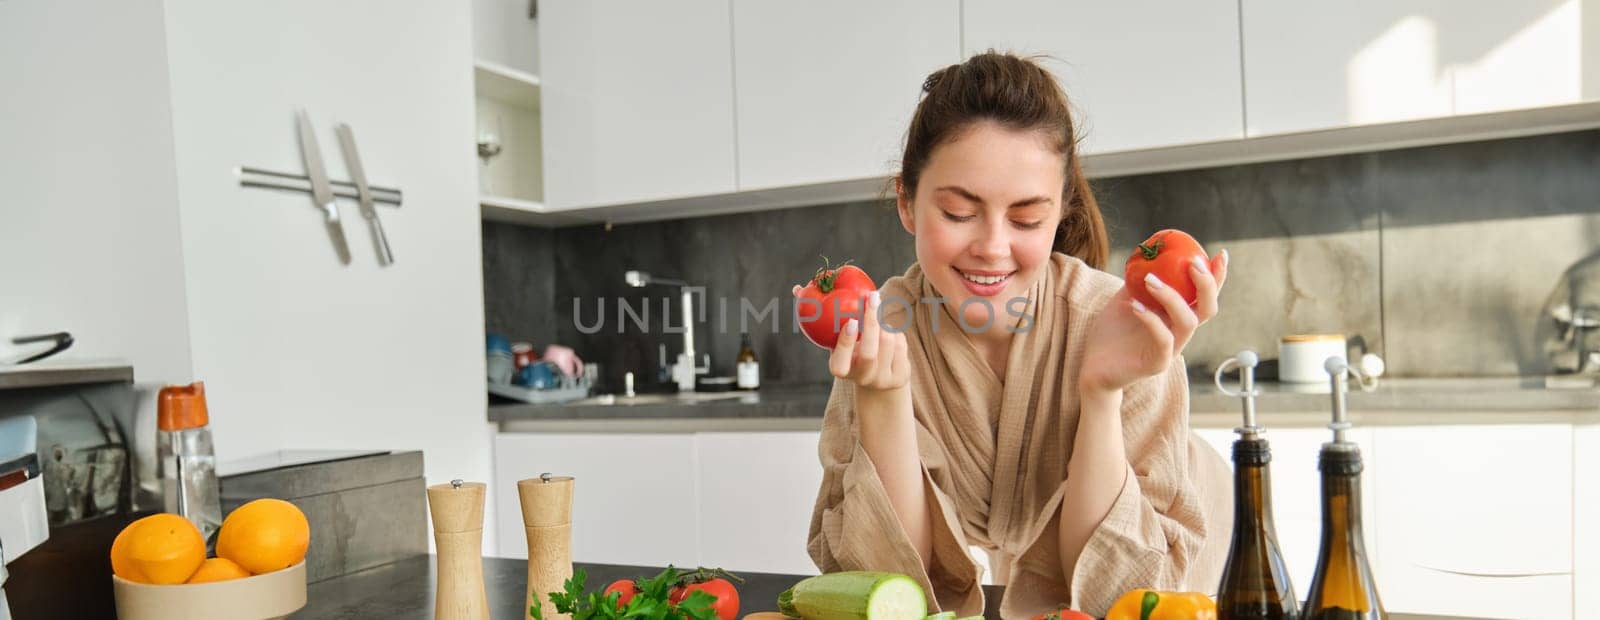 Portrait of beautiful woman cooking in the kitchen, chopping vegetables on board, holding tomatoes, lead healthy lifestyle with preparing fresh salads, vegan meals.